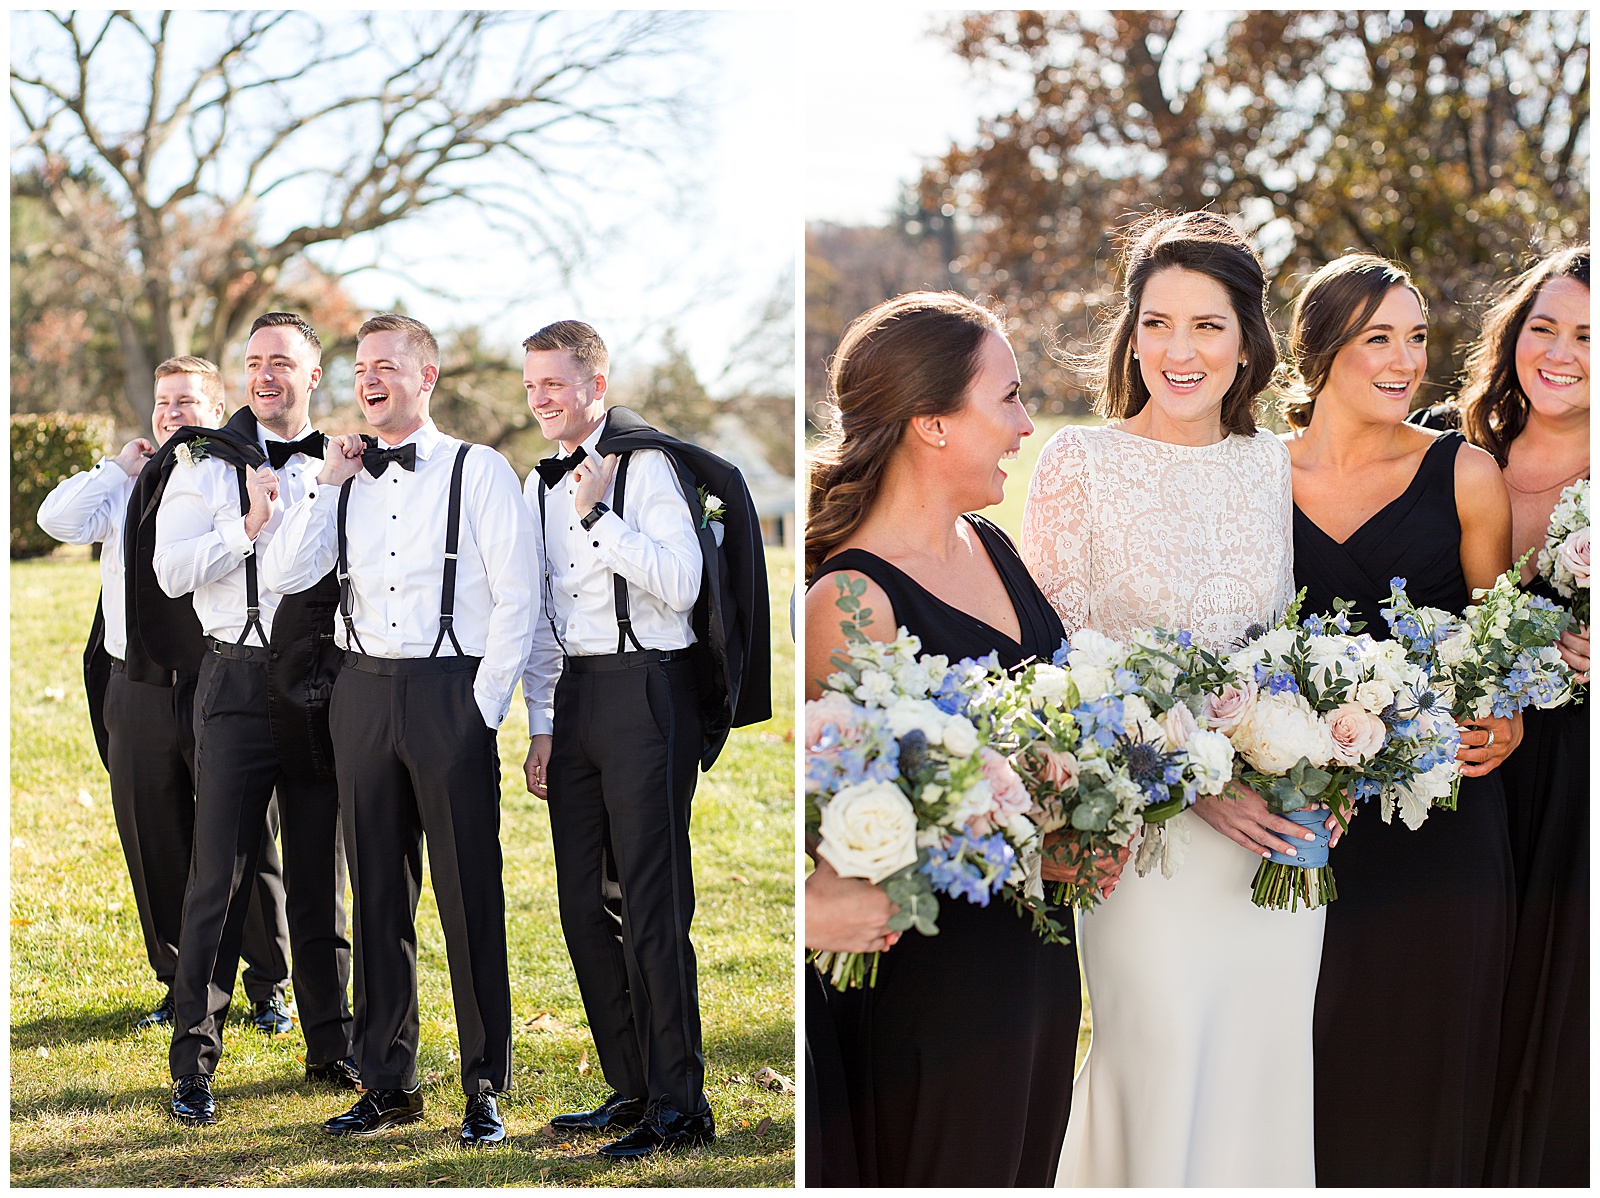 Bridal Party portraits on the lawn at Brae Burn Country Club